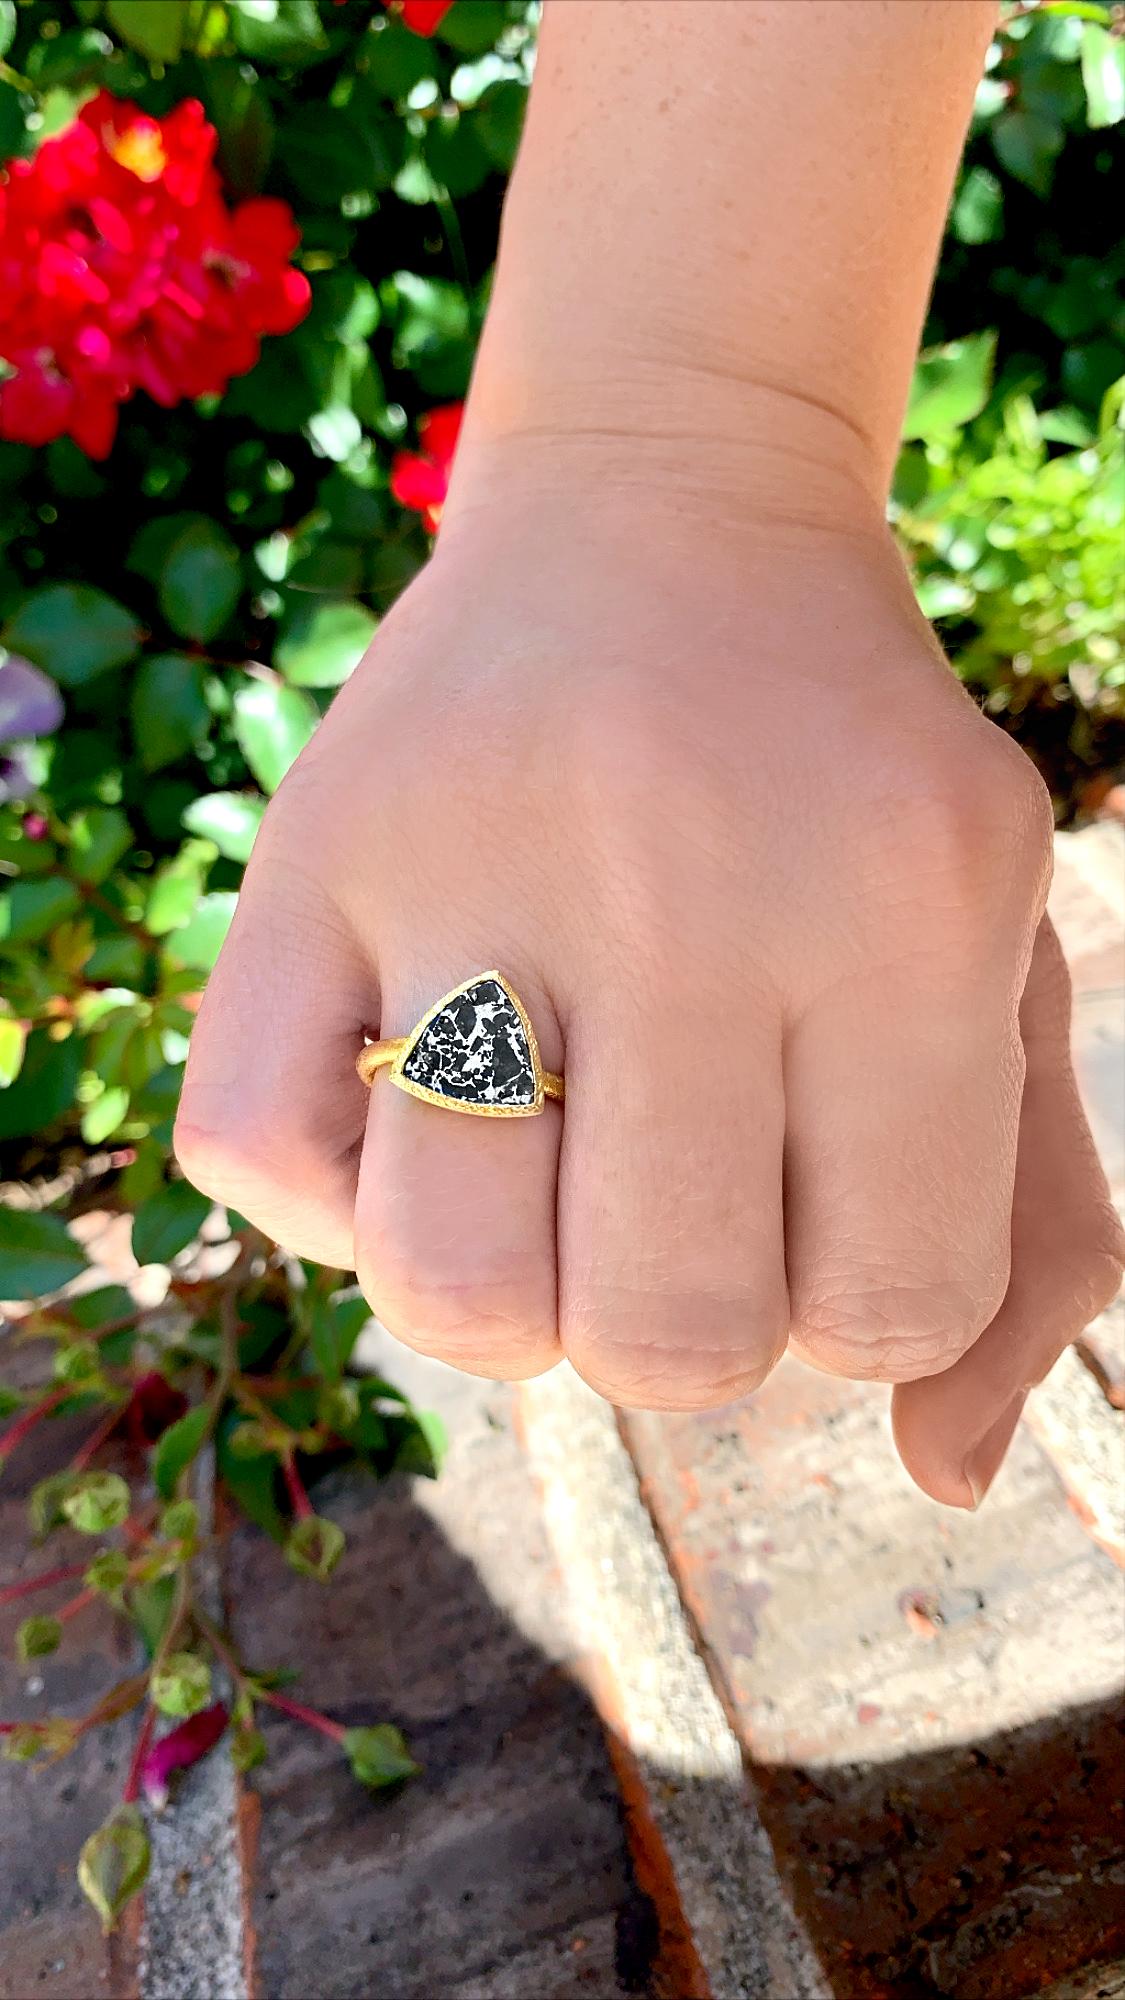 One of a Kind Solitaire Ring handcrafted by jewelry maker Devta Doolan in signature finished 22k yellow gold showcasing an out-of-this-world (literally and metaphorically!) meteorite with a remarkable mirrored quality. Stamped and hallmarked 22k /